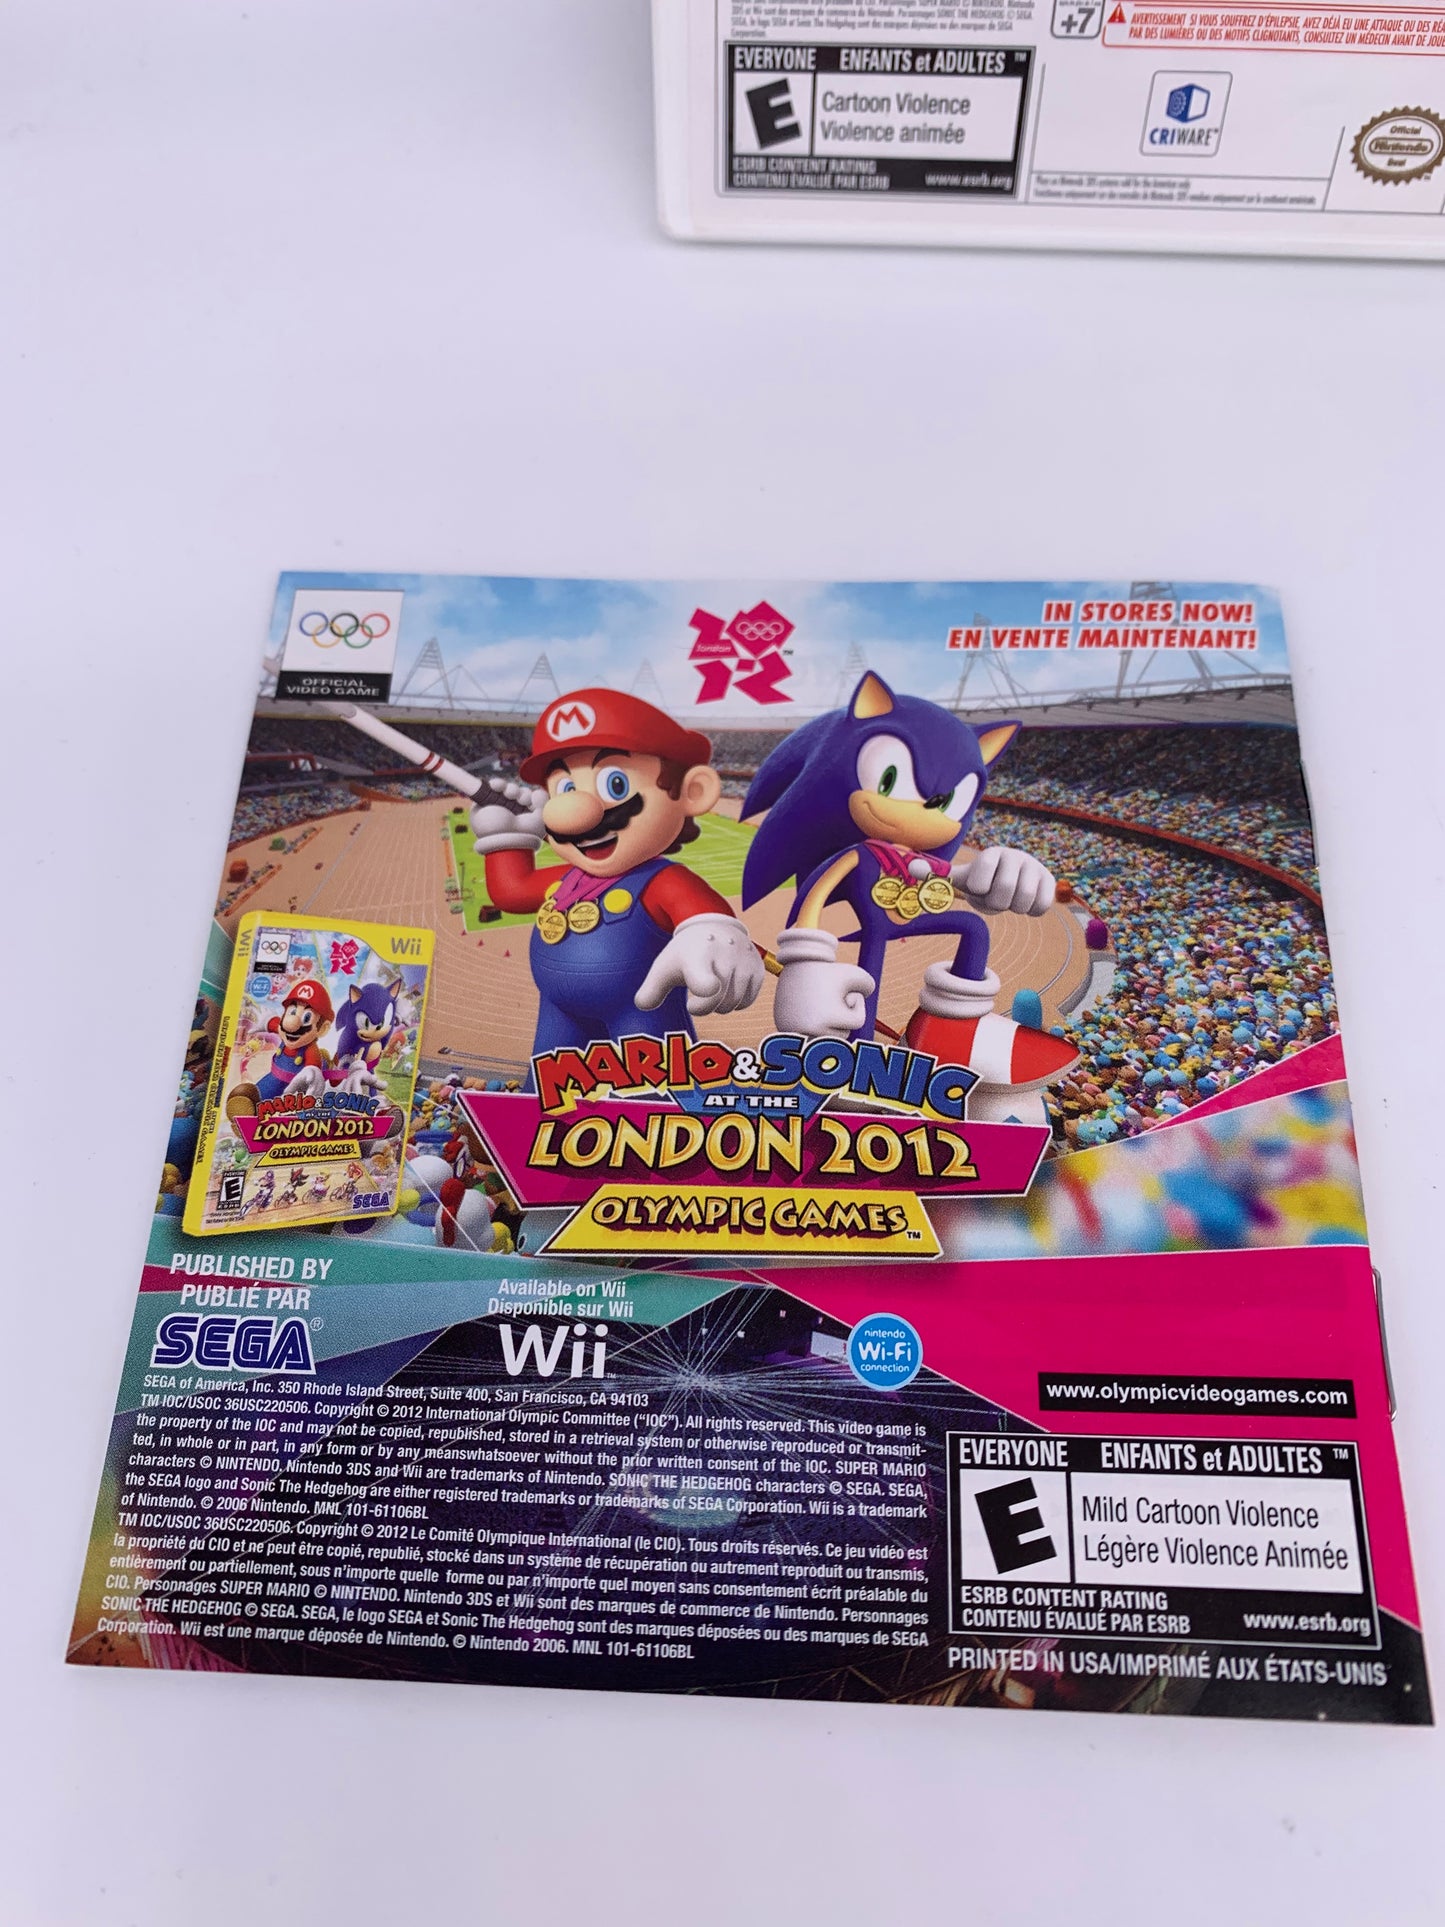 NiNTENDO 3DS | MARiO & SONiC AT THE OLYMPiC GAMES LONDON 2012